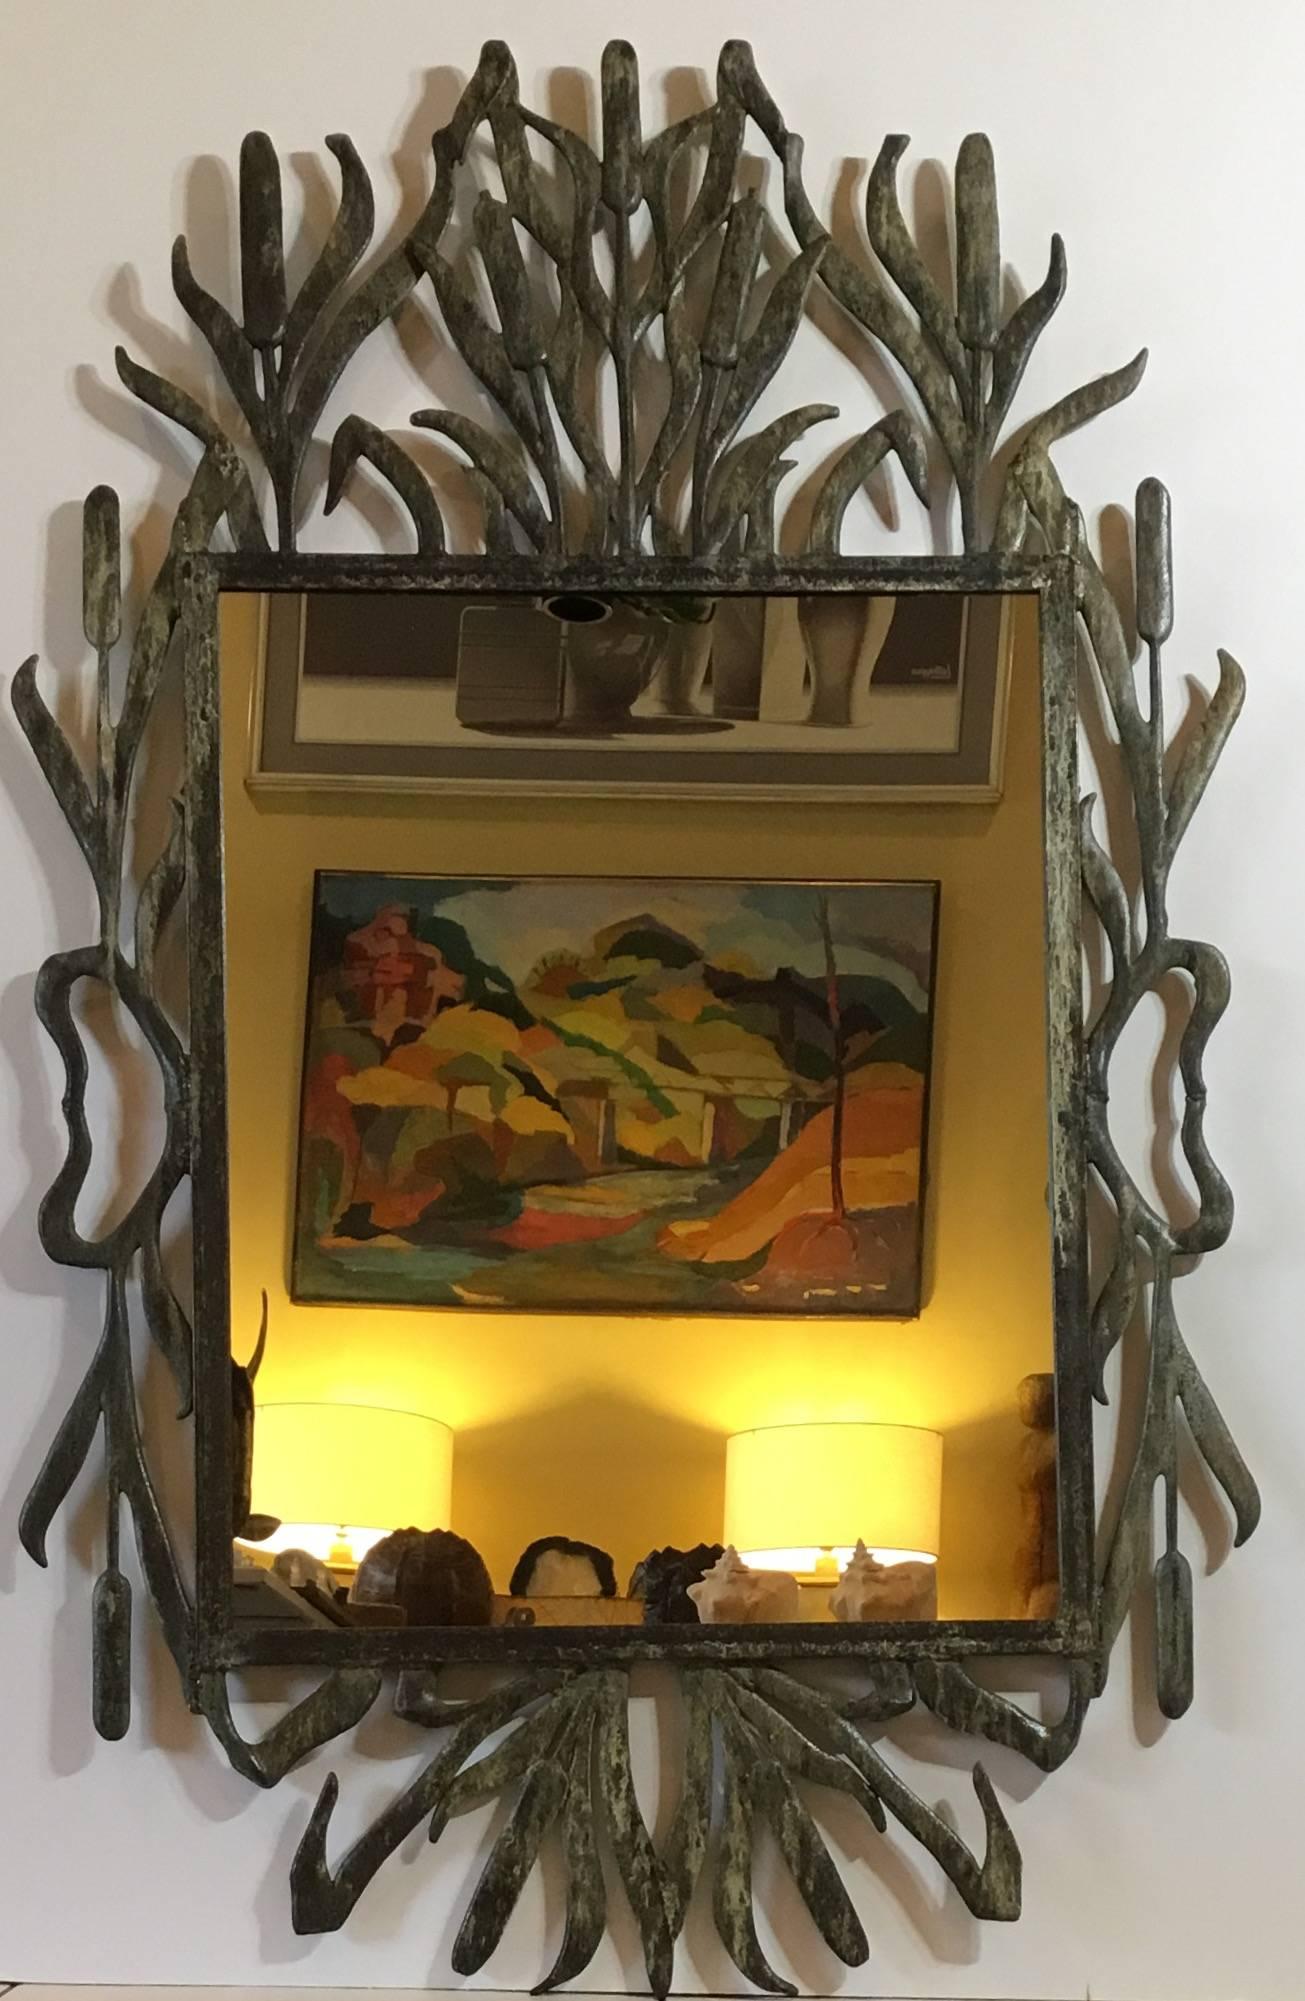 Fantastic decorative mirror made of cast iron, unusual cat tail motif with beautifullly enhance patina treated for rust, look very impressive.
Full size: 54".5 x 34"
Mirror size only 28".5 x 22".5 

One more available.